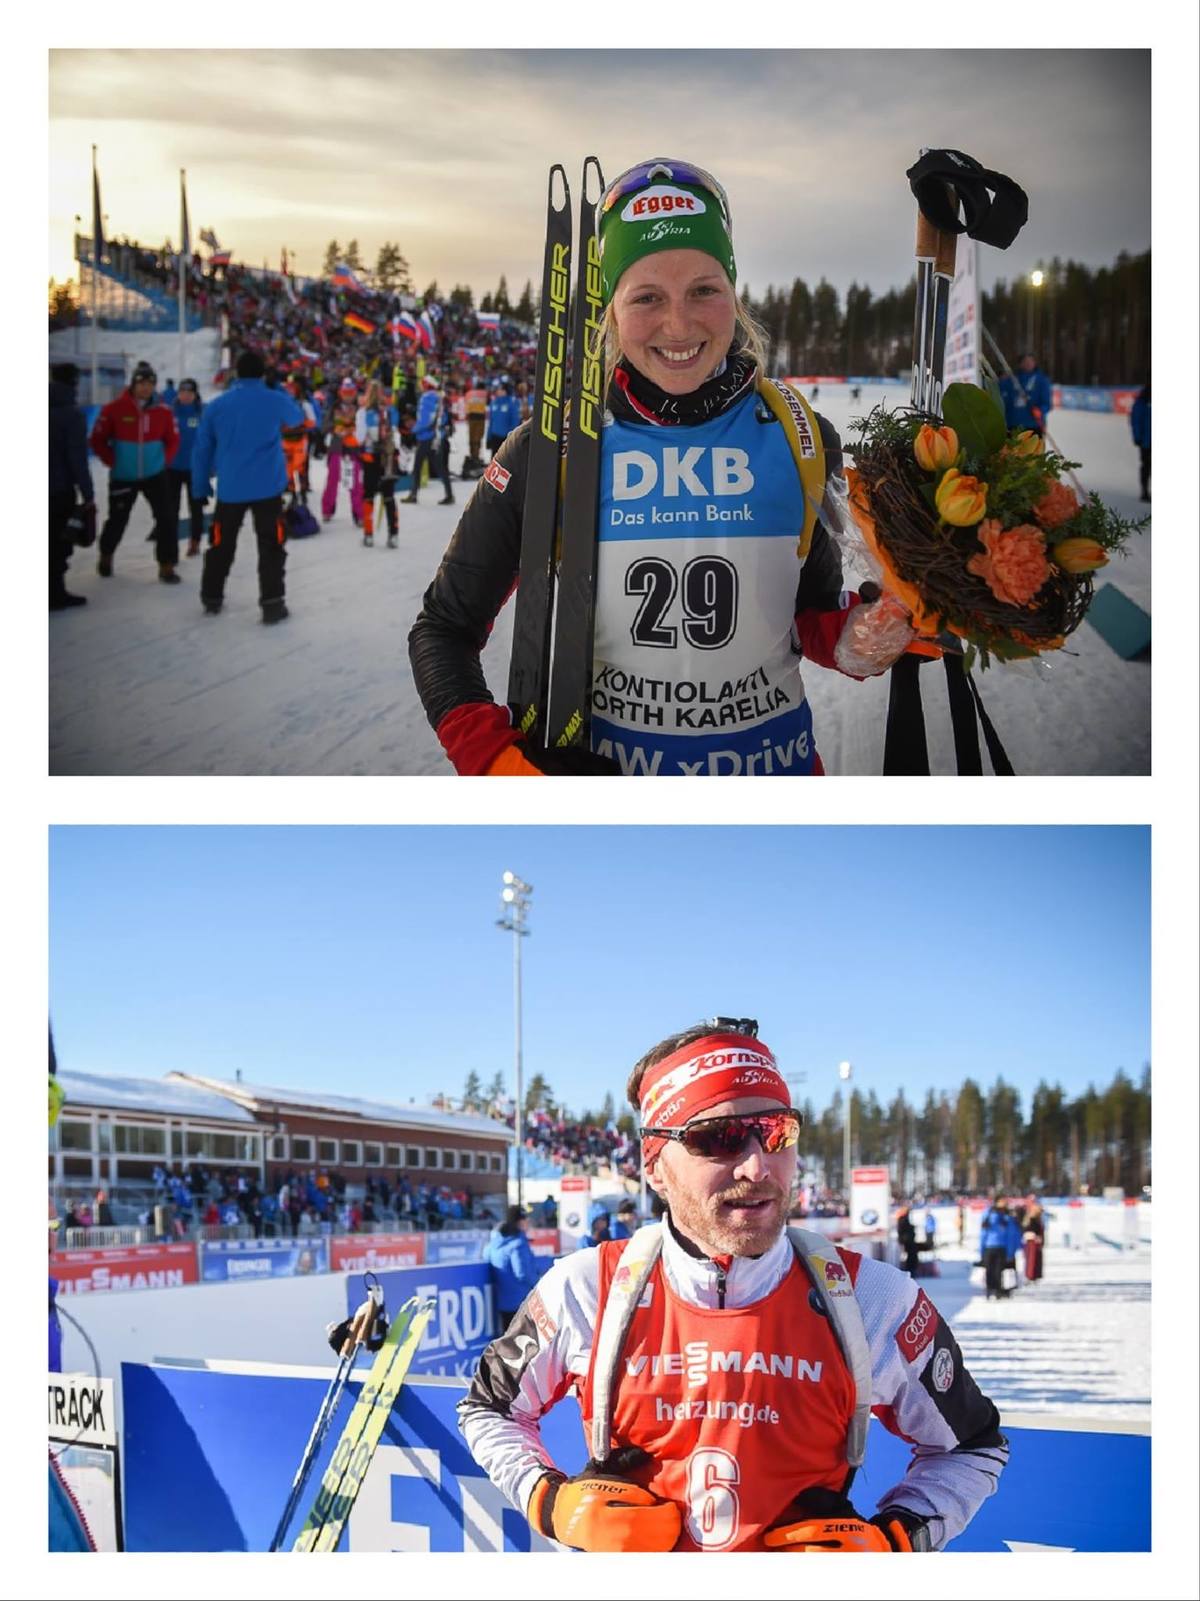 Lisa Theresa Hauser and Simon Eder combined to win the single mixed relay, with five spares in 31:35.1. Susan Dunklee of the USA finished second, also with five spares, 32.8 seconds back, after a thrilling last loop battle between Bailey and Germany's Rom